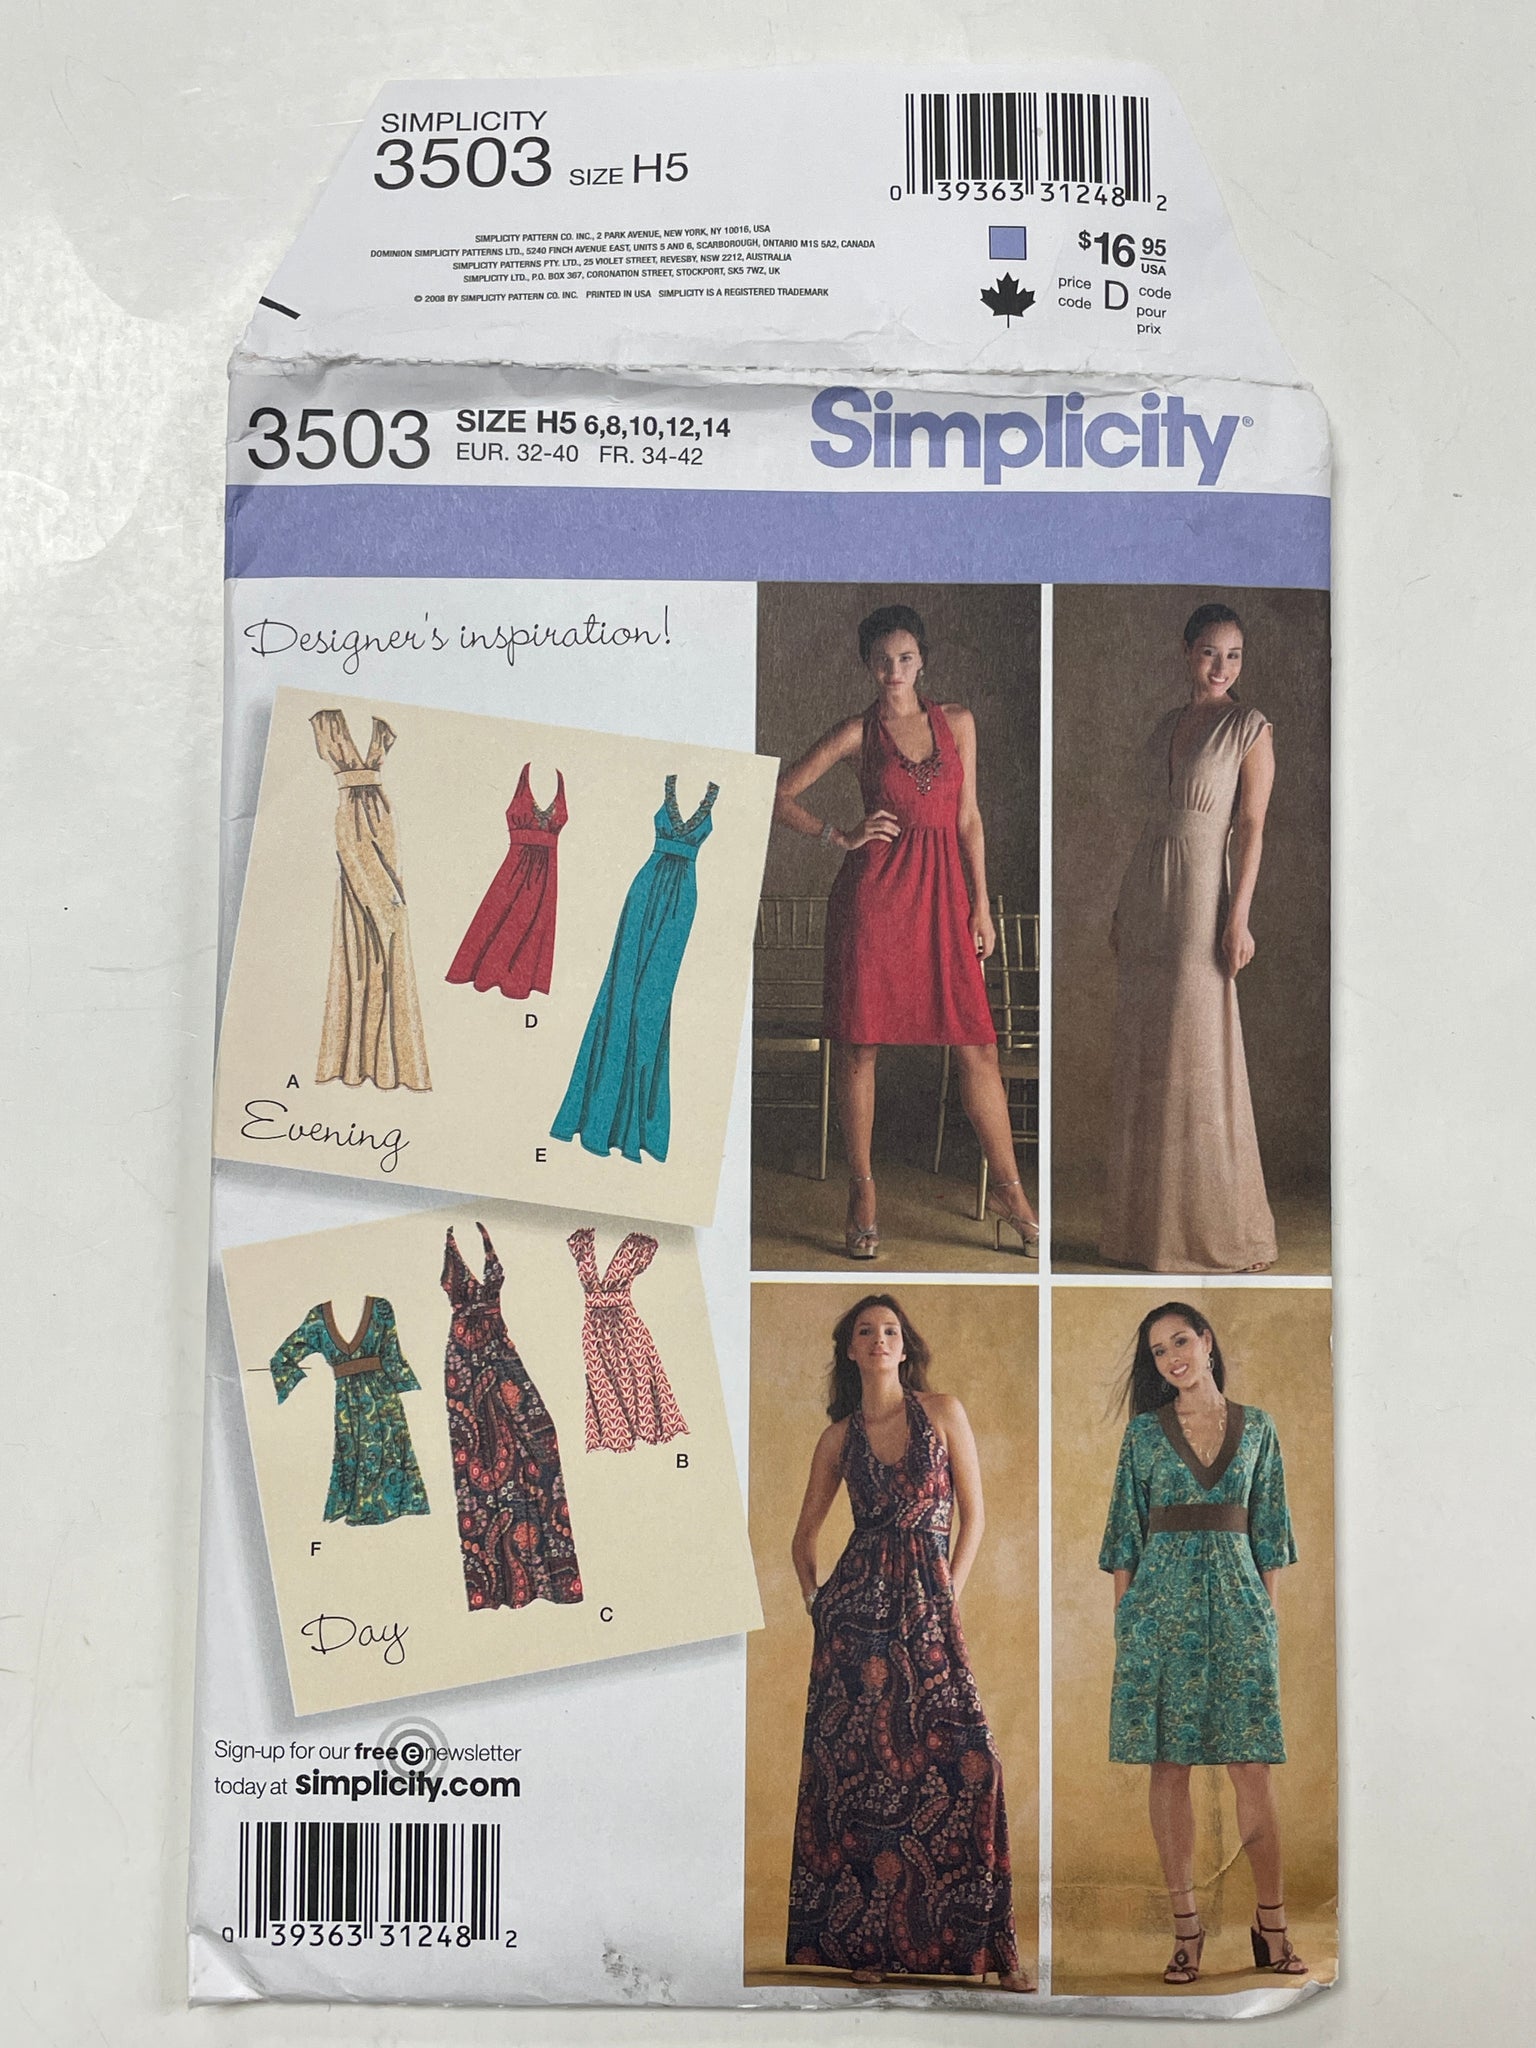 2008 Simplicity 3503 Sewing Pattern - Dress FACTORY FOLDED